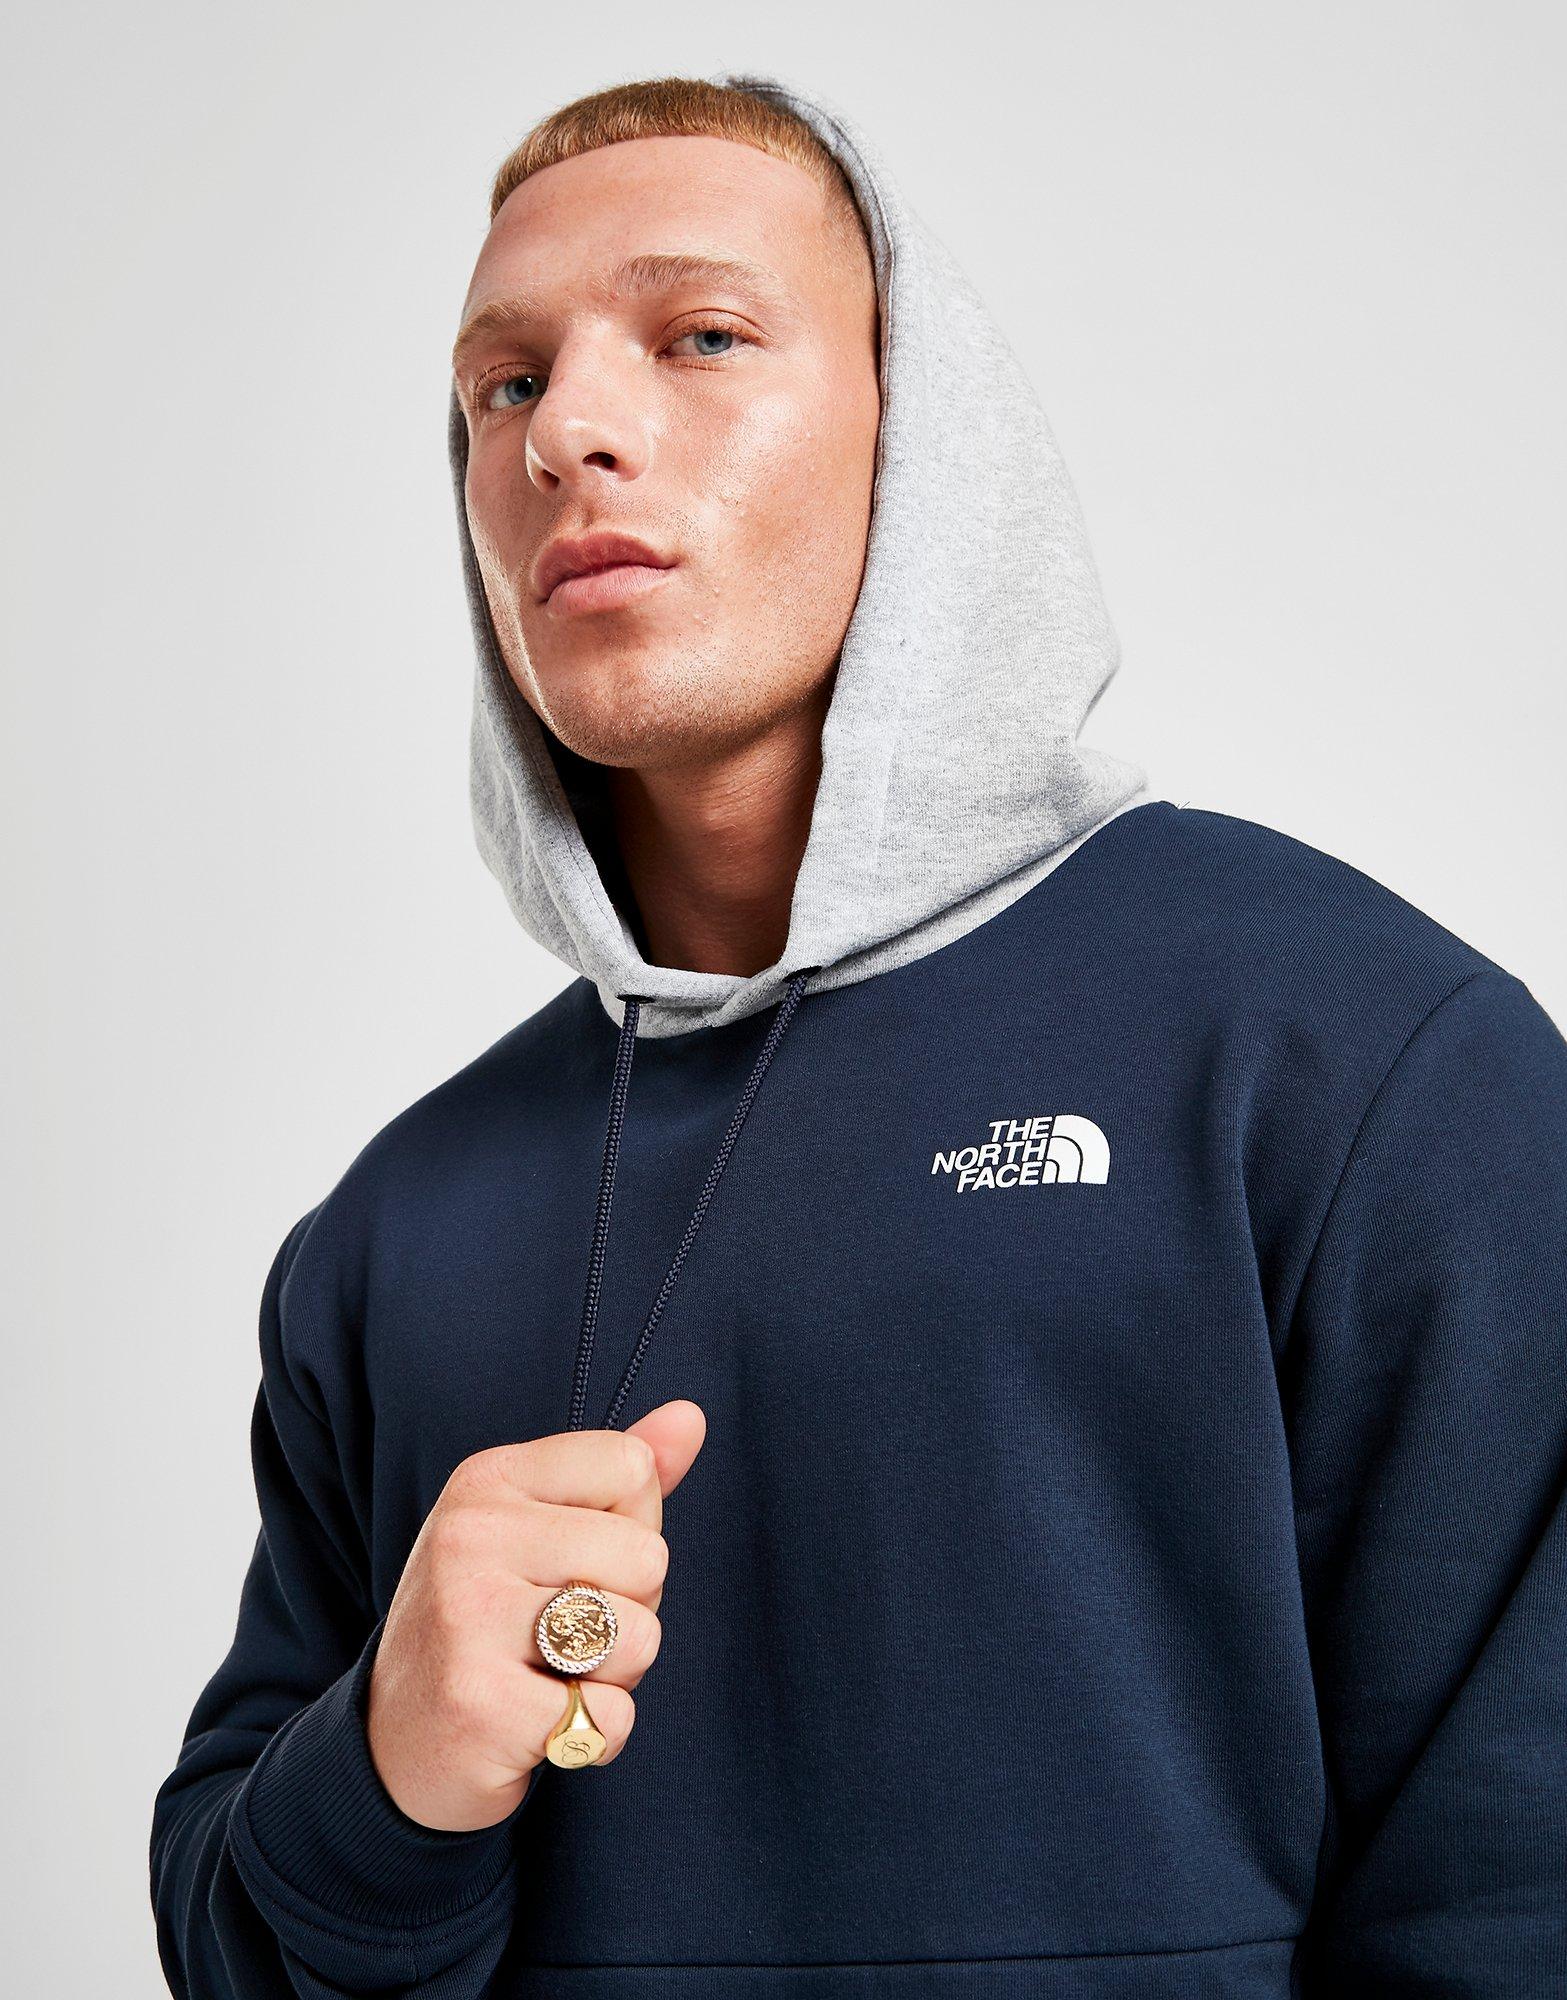 the north face hoodie blue